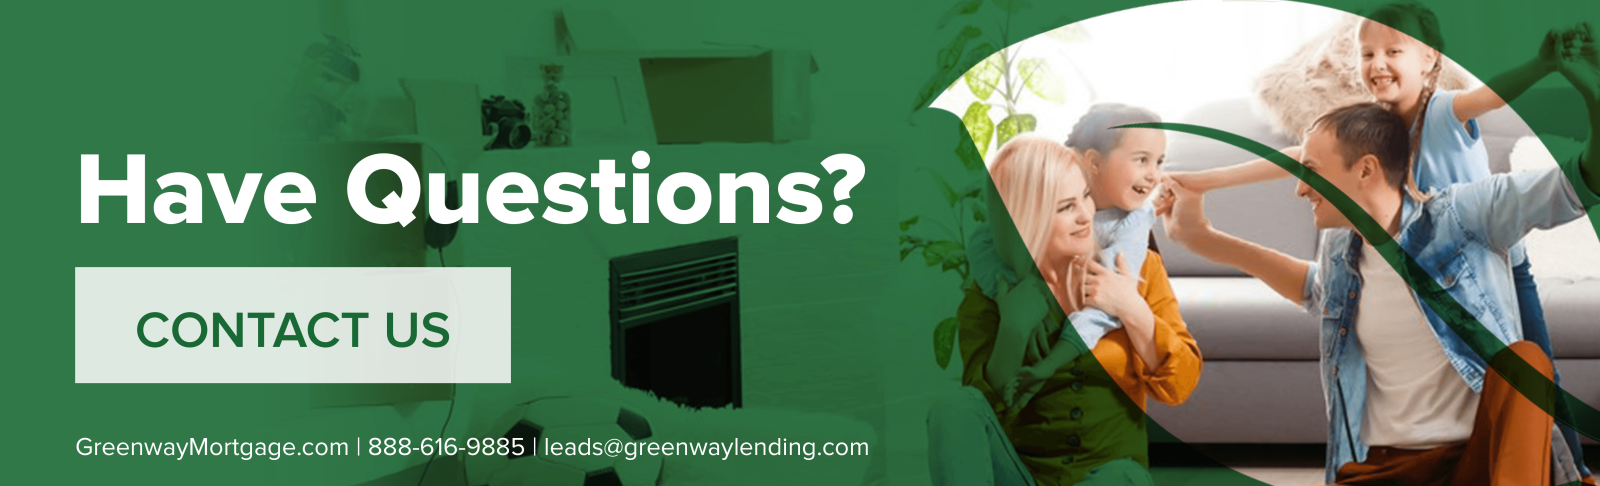 Have Questions? Contact Greenway Mortgage